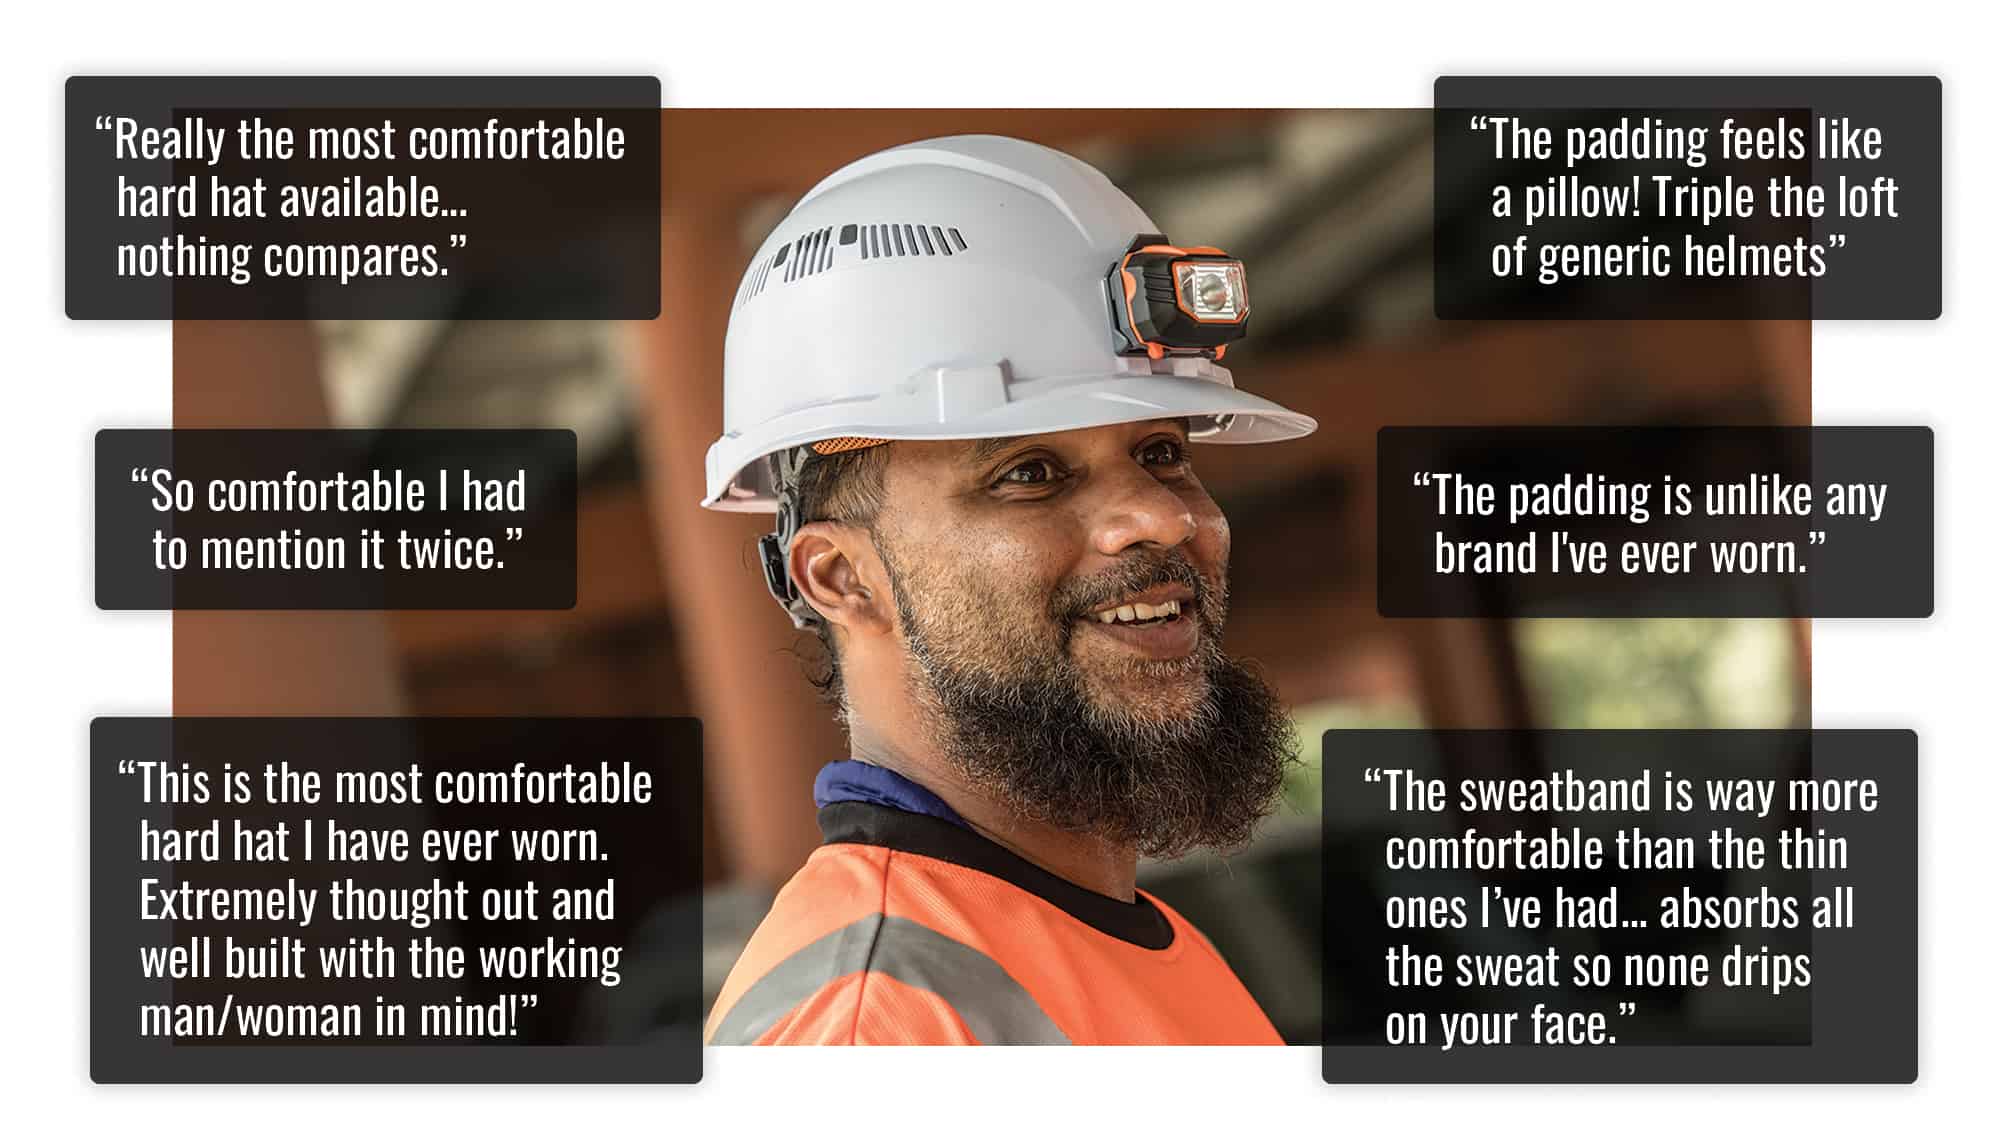 Work in hard hat surrounded by quotes. Quote 1: Really the most comfortable hard hat avilable...nothing compares. Quote 2: So comfortable I had to mention it twice. Quote 3: This ist he most comfortable hard hat I have ever worn. Extremely thought out and well built with the working man/woman in mind! Quote 4: The padding feels like a pillow! Triple the loft of generic helmets. Quote 5: The padding is unlike any brand I've ever worn. Quote 6: The sweatband is way more comfortable than the thin ones I've had...absorbs all the sweat so none drips on your face.